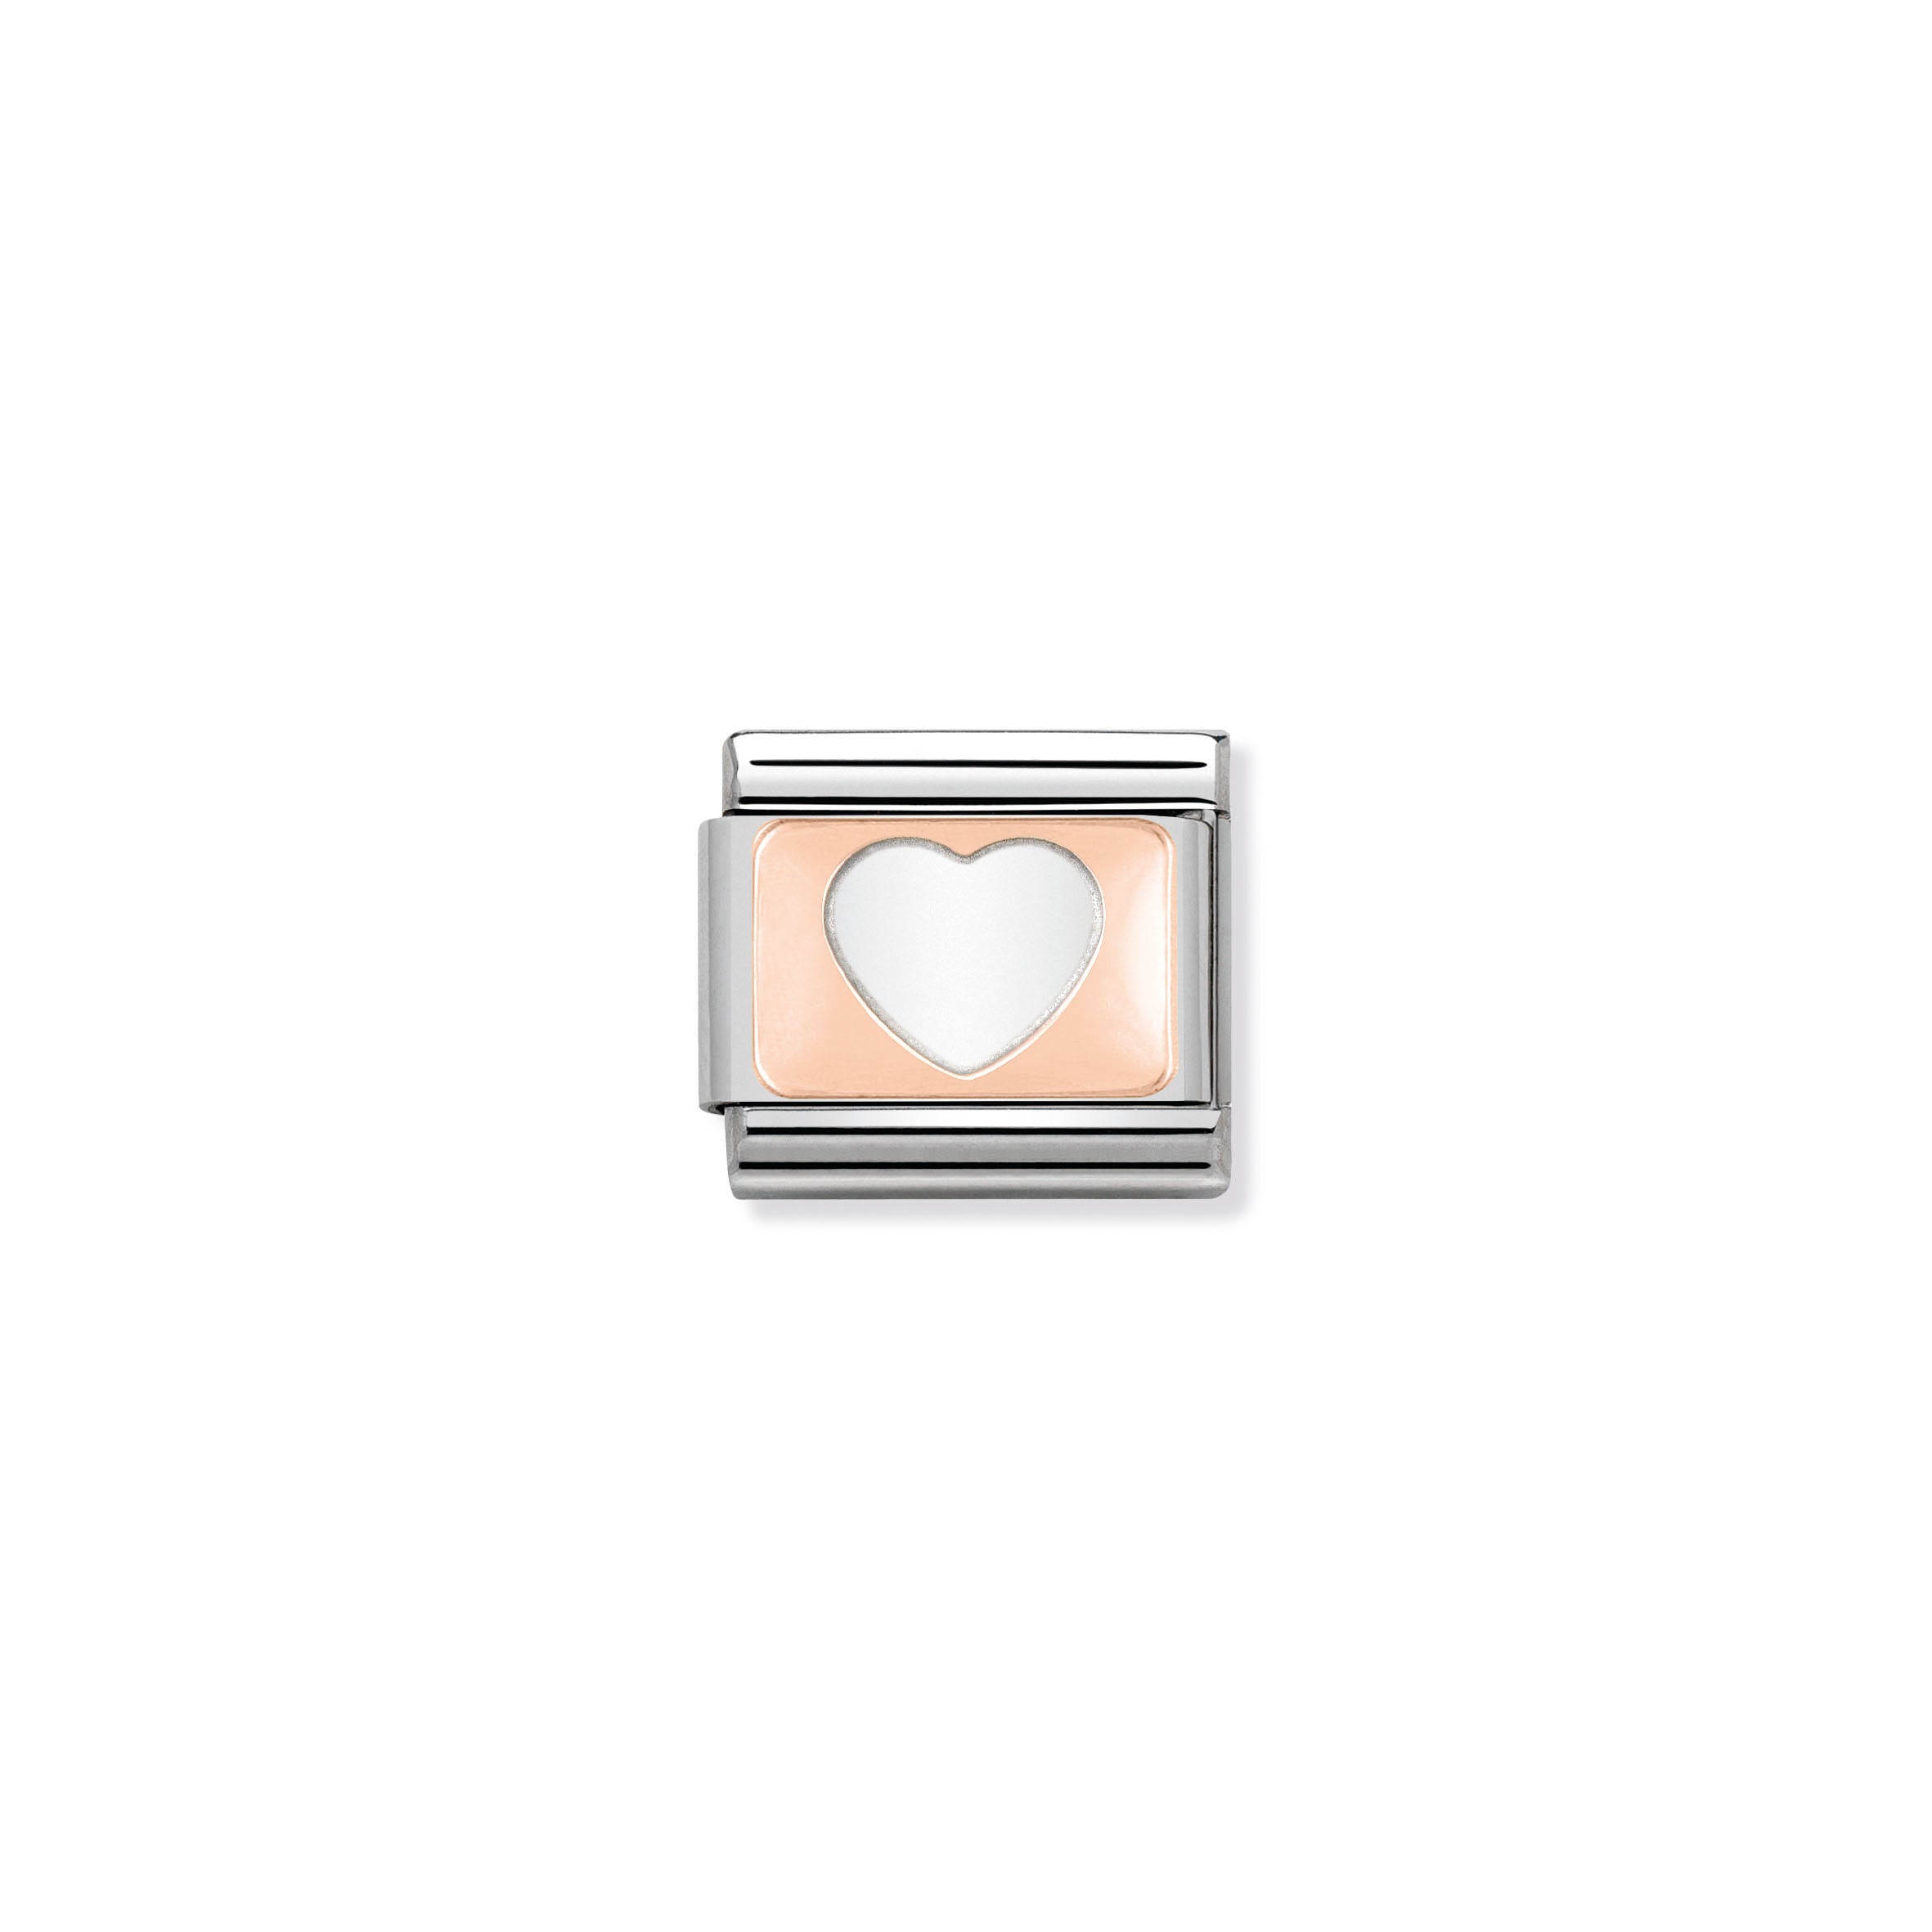 NOMINATION - Composable 430101 08 COMP Classic ROSE GOLD PLATE st/st, 9ct rose gold (Heart)